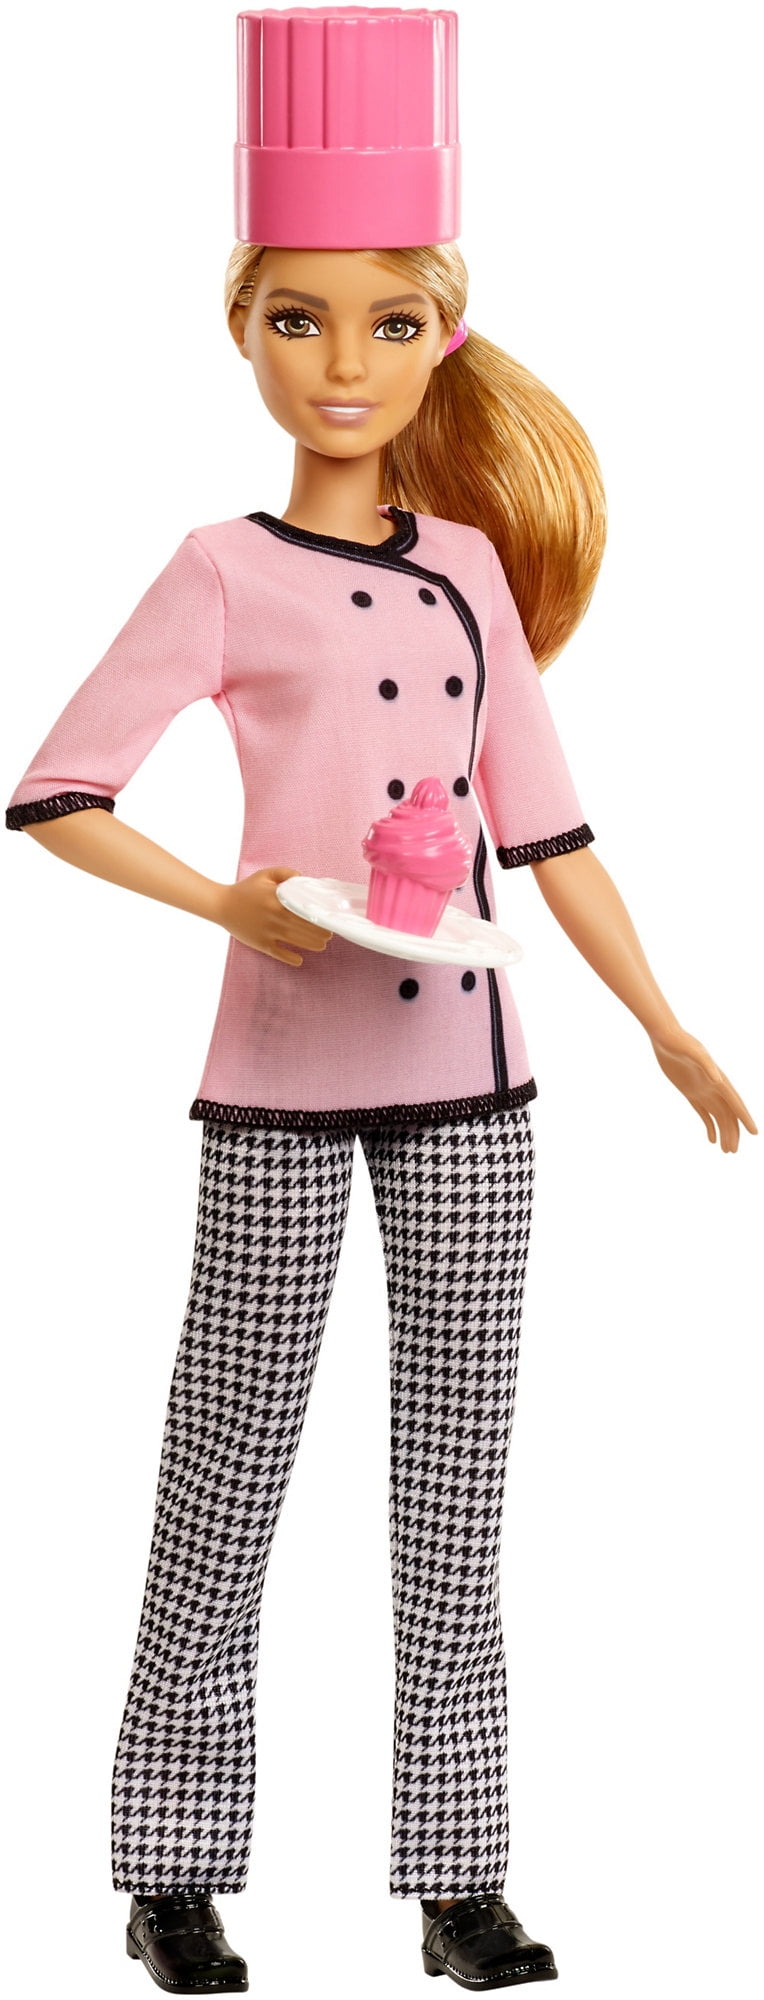 Barbie Career Dolls Chef Dress Up Collectable Doll 